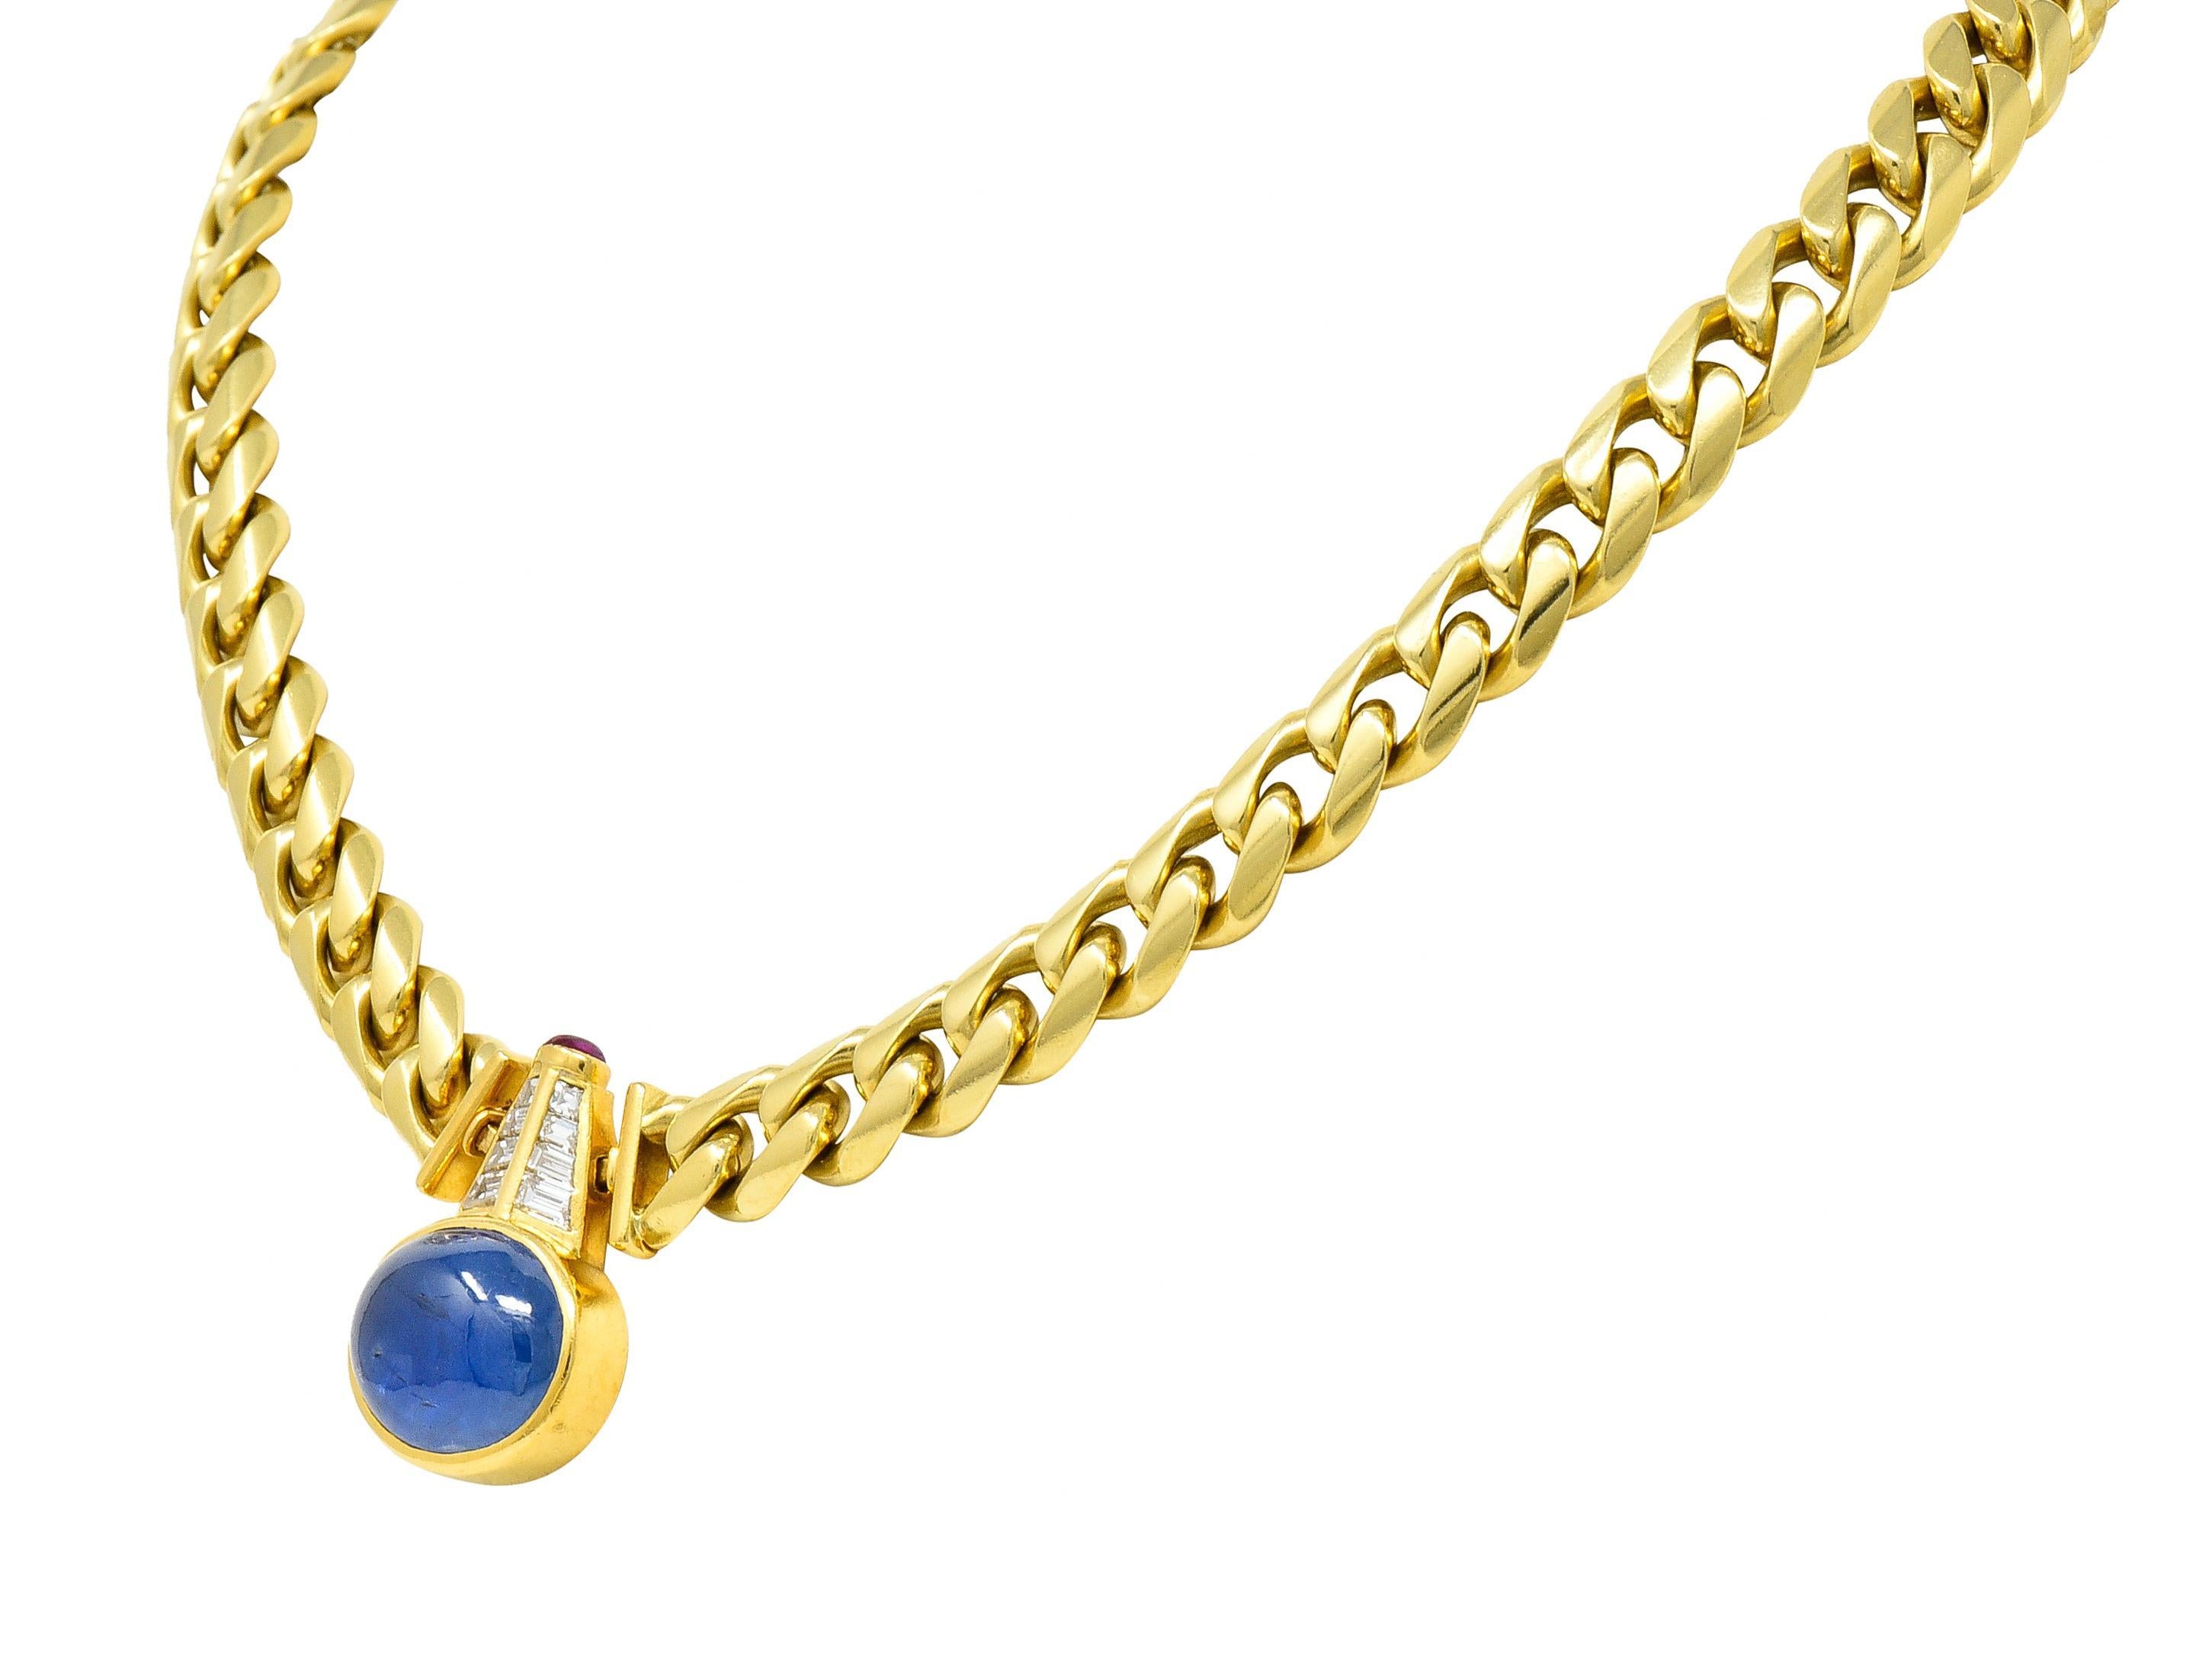 Bulgari No Heat Burma Sapphire Ruby Diamond 18K Yellow Gold Vintage Necklace In Excellent Condition For Sale In Philadelphia, PA